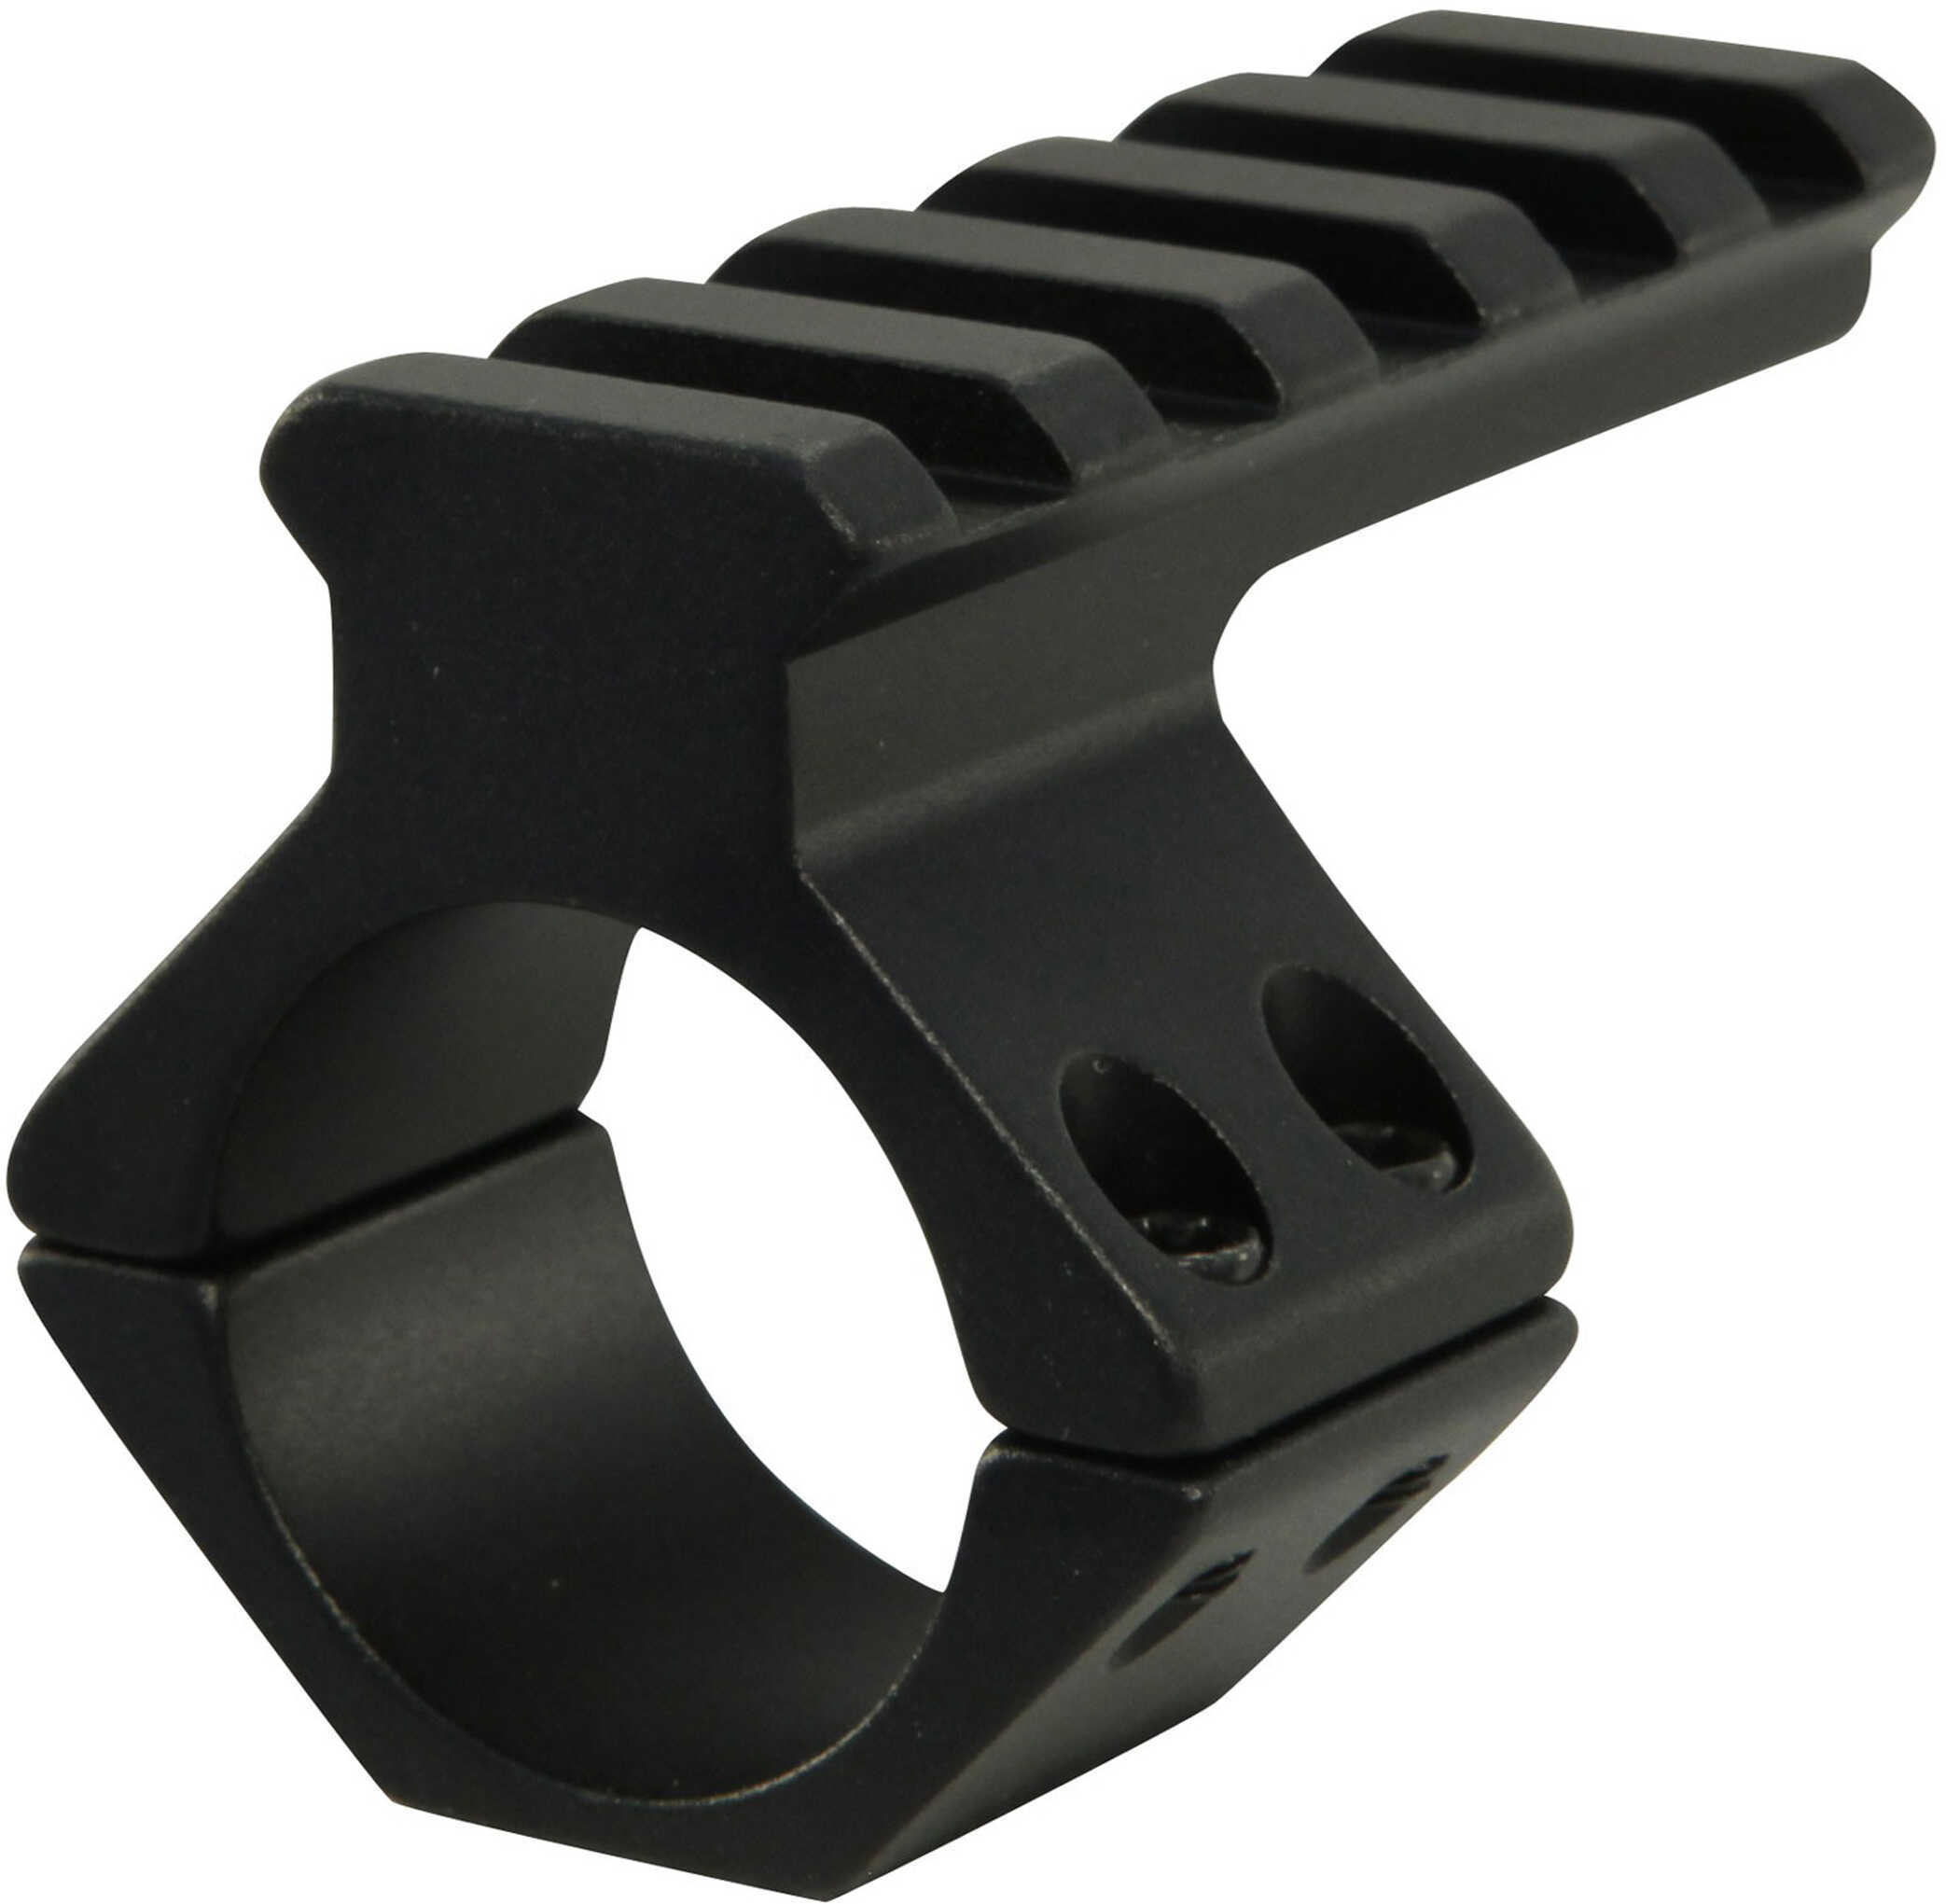 Weaver Tactical Style Scope-Mounted Picatinny Adaptor 30mm